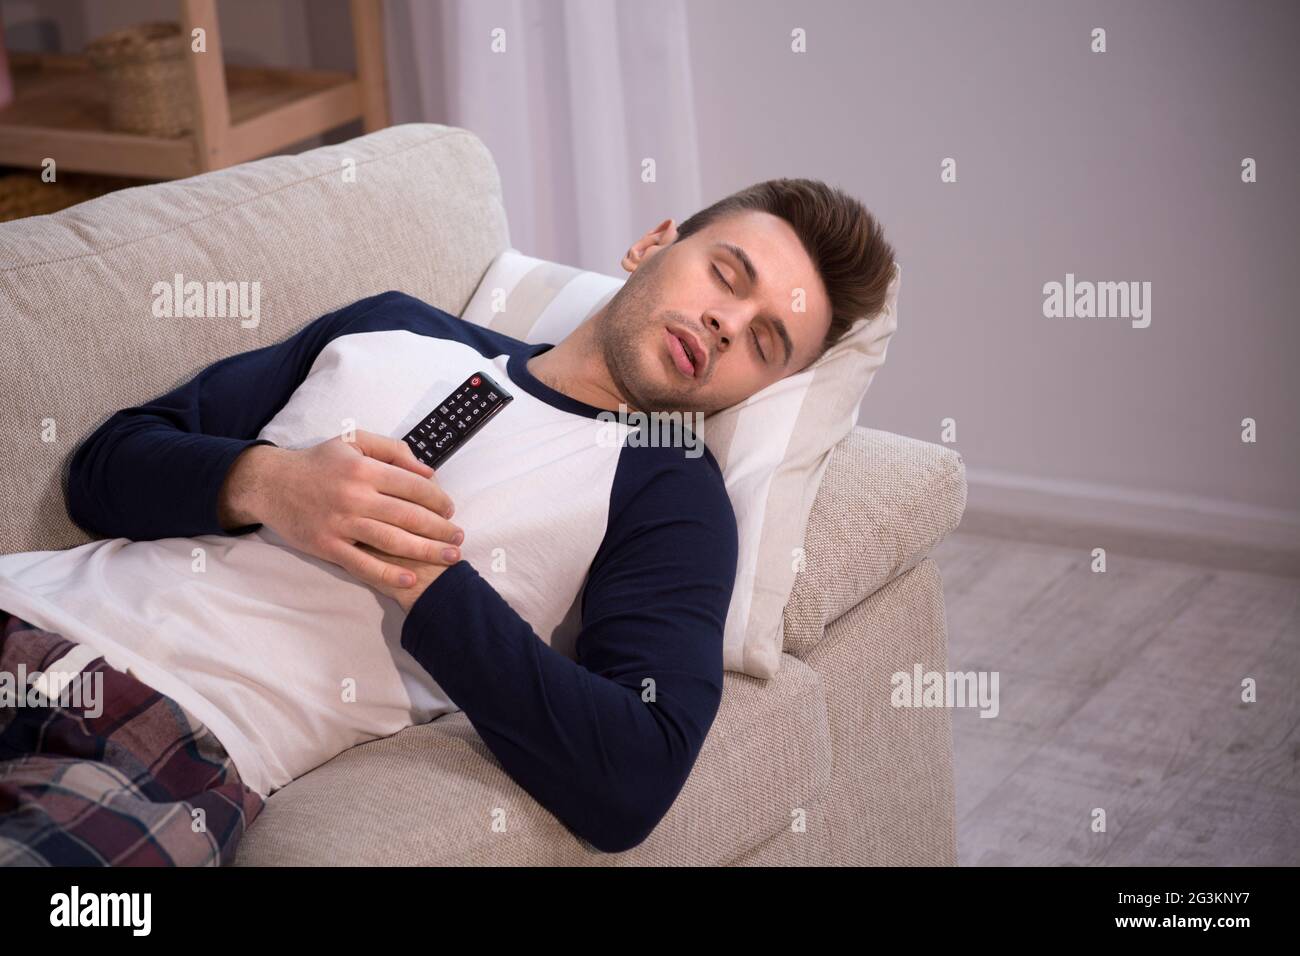 Man sleeping on couch with TV remote in his hands. Stock Photo